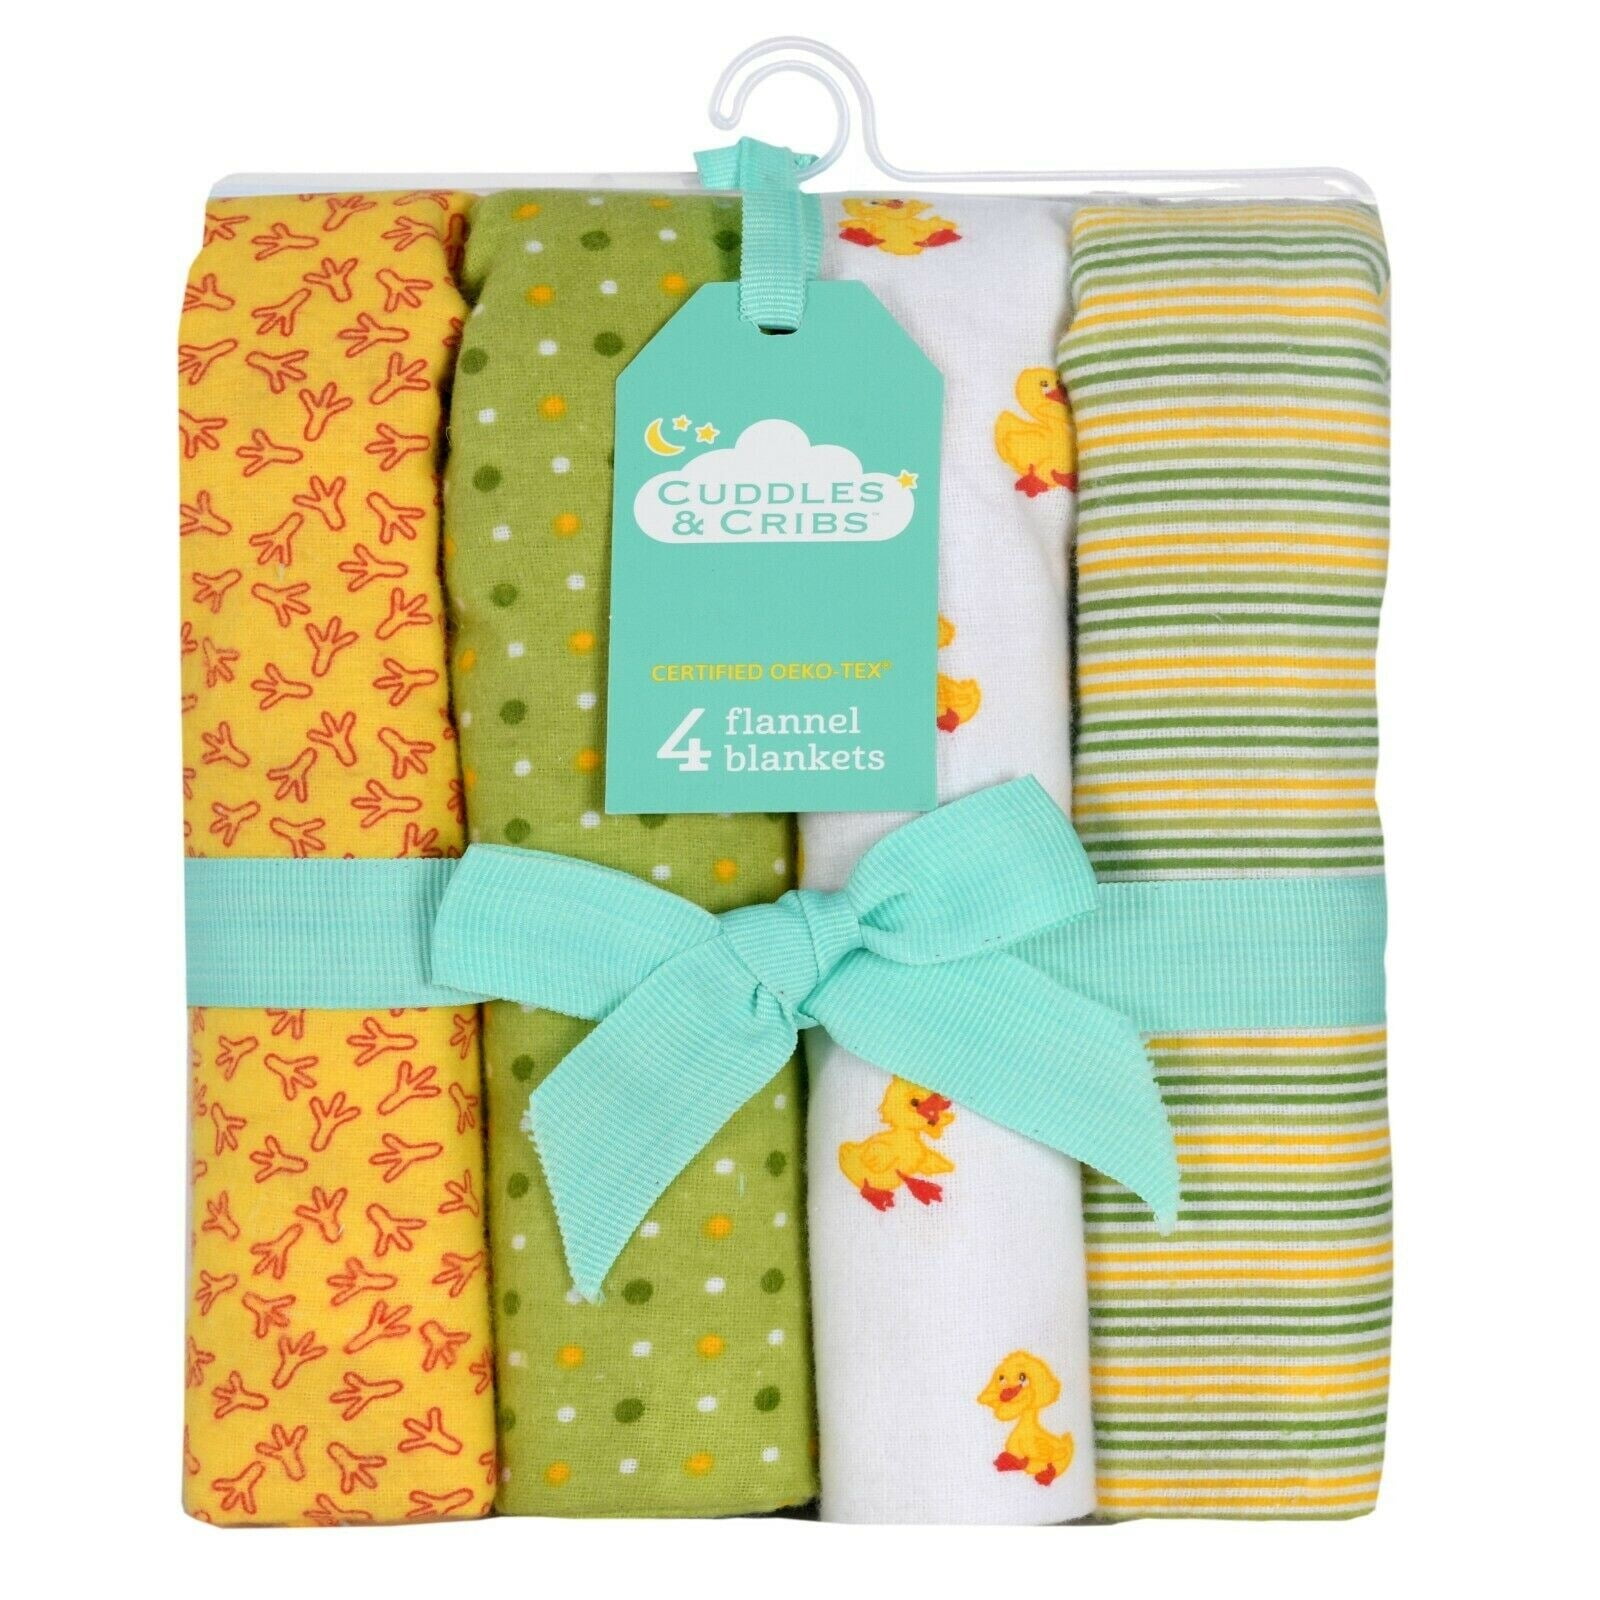 Cuddles & Cribs New Born Cotton Flannel Baby Receiving Blankets Cars & Stripes 4 Count 